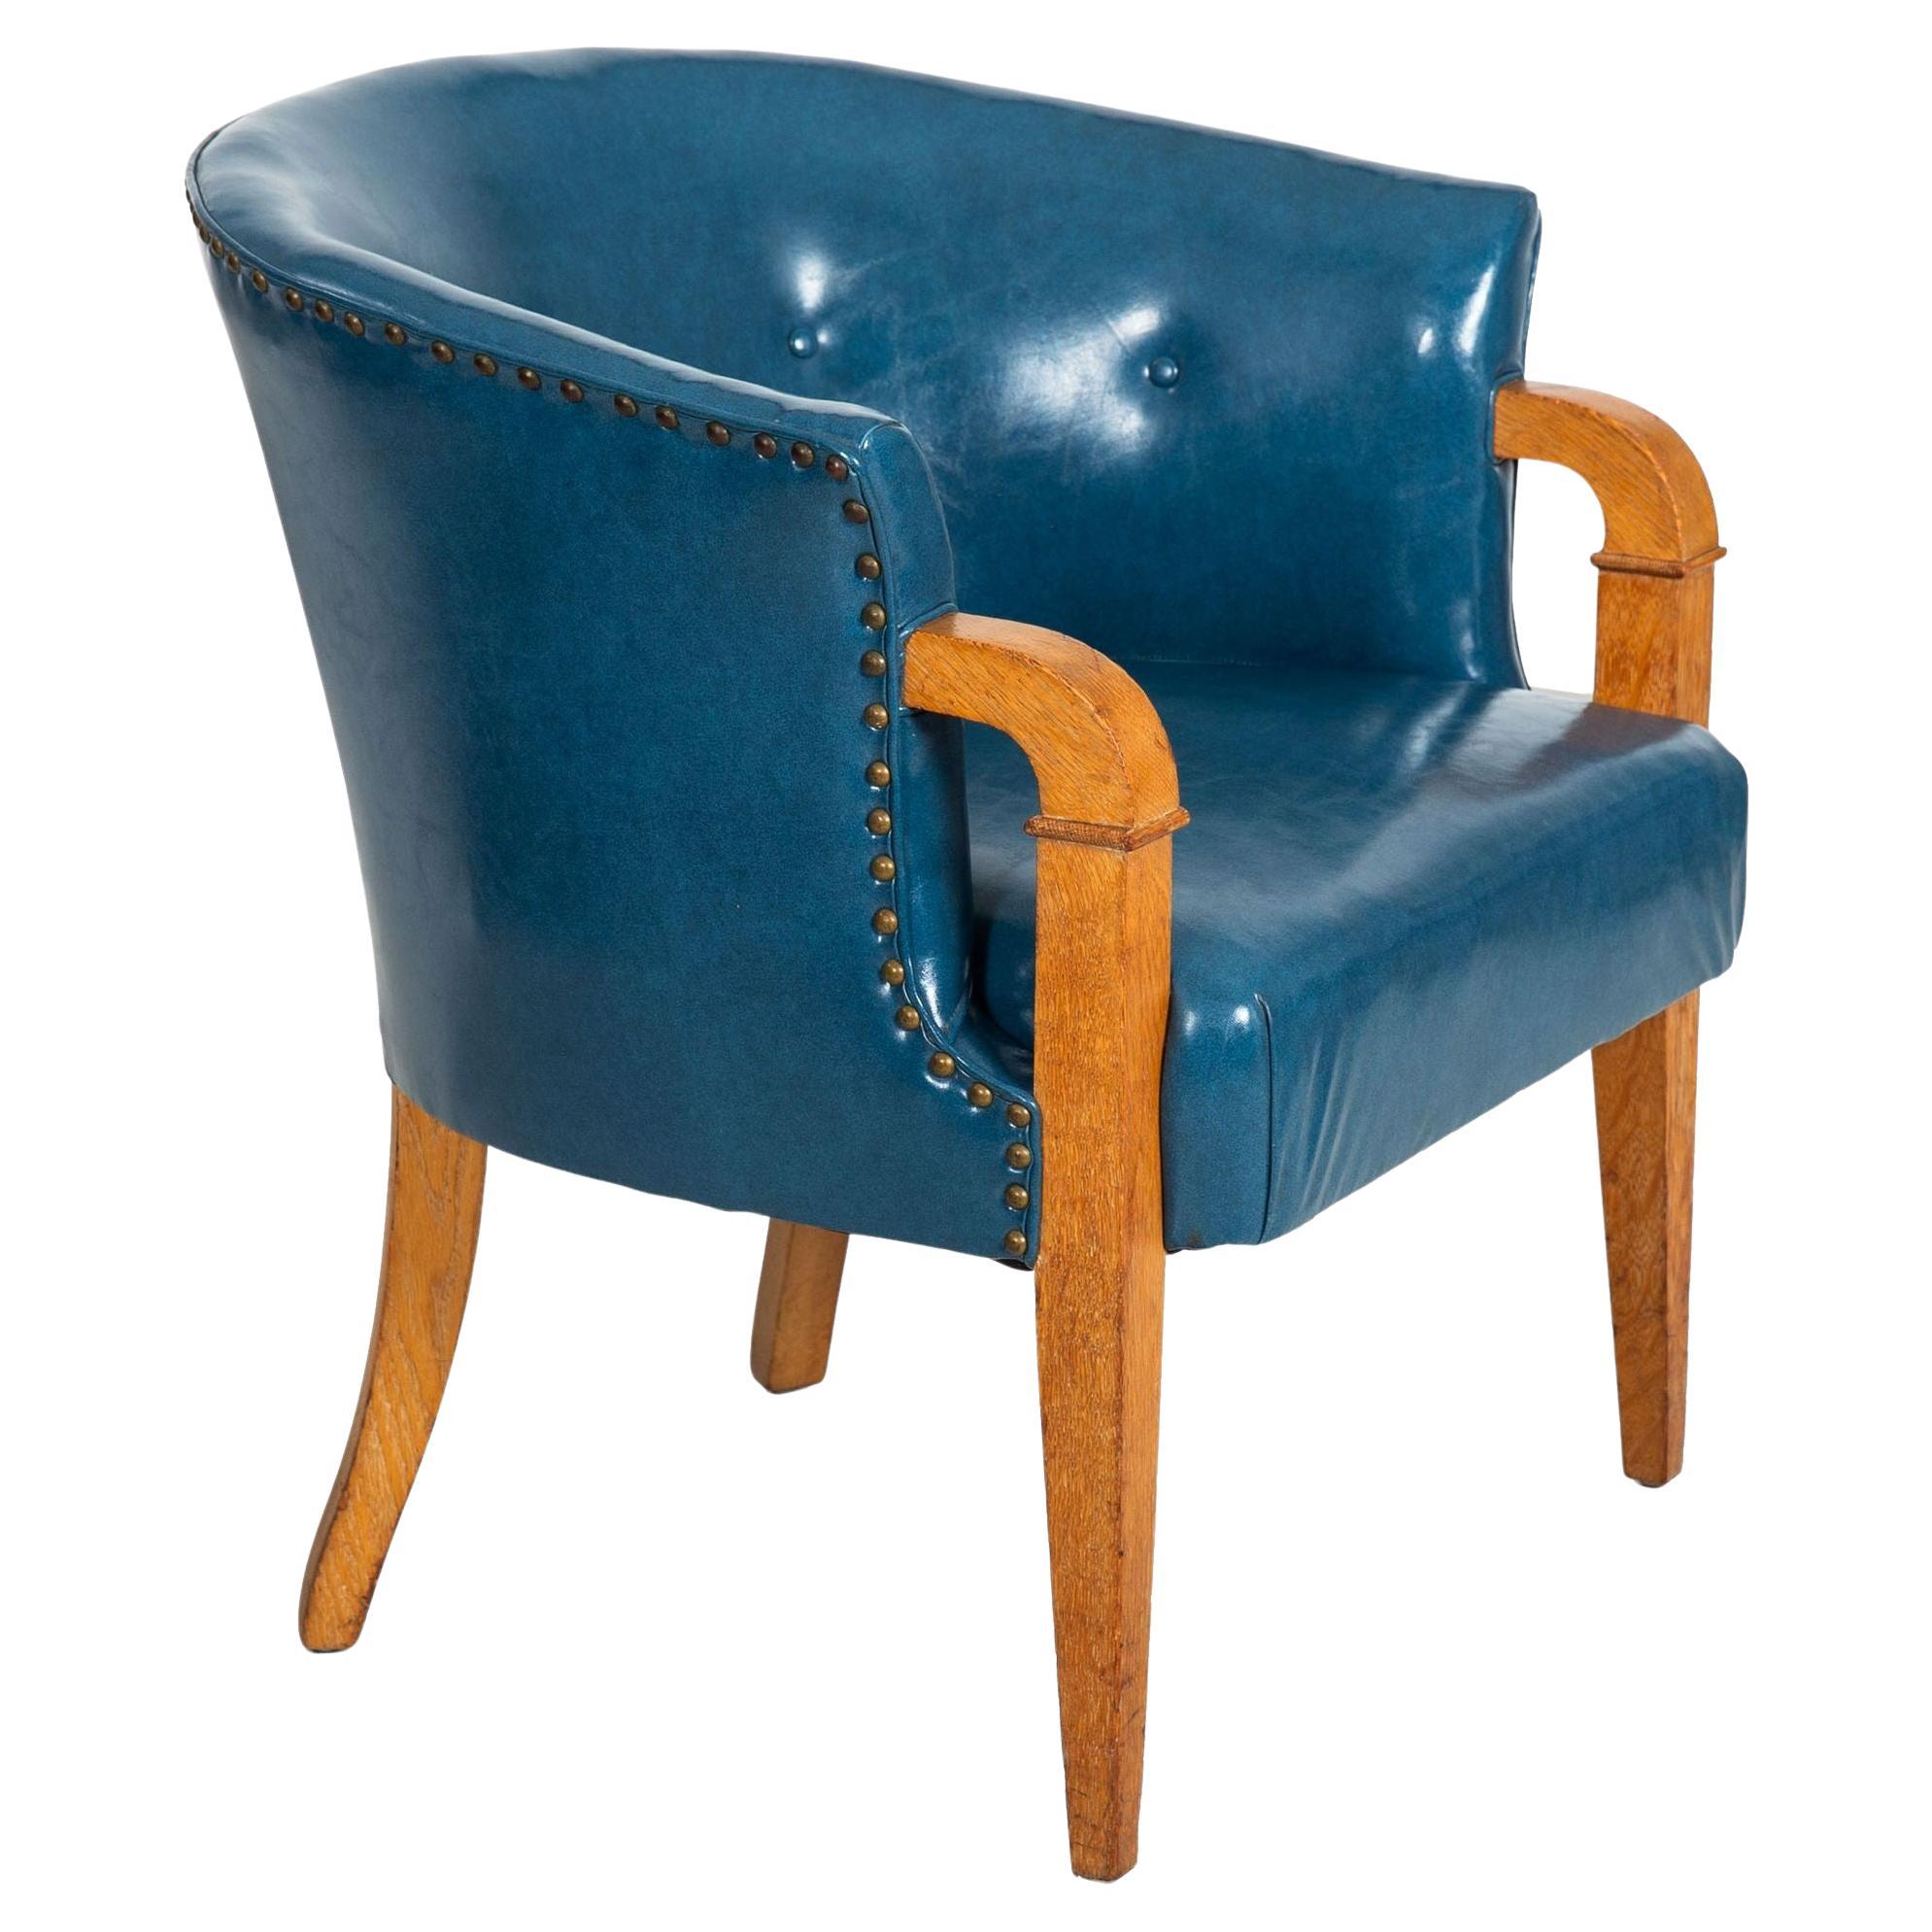 Mid-Century Modernist White Oak Tub Arm Chair in Blue Faux-Leather For Sale